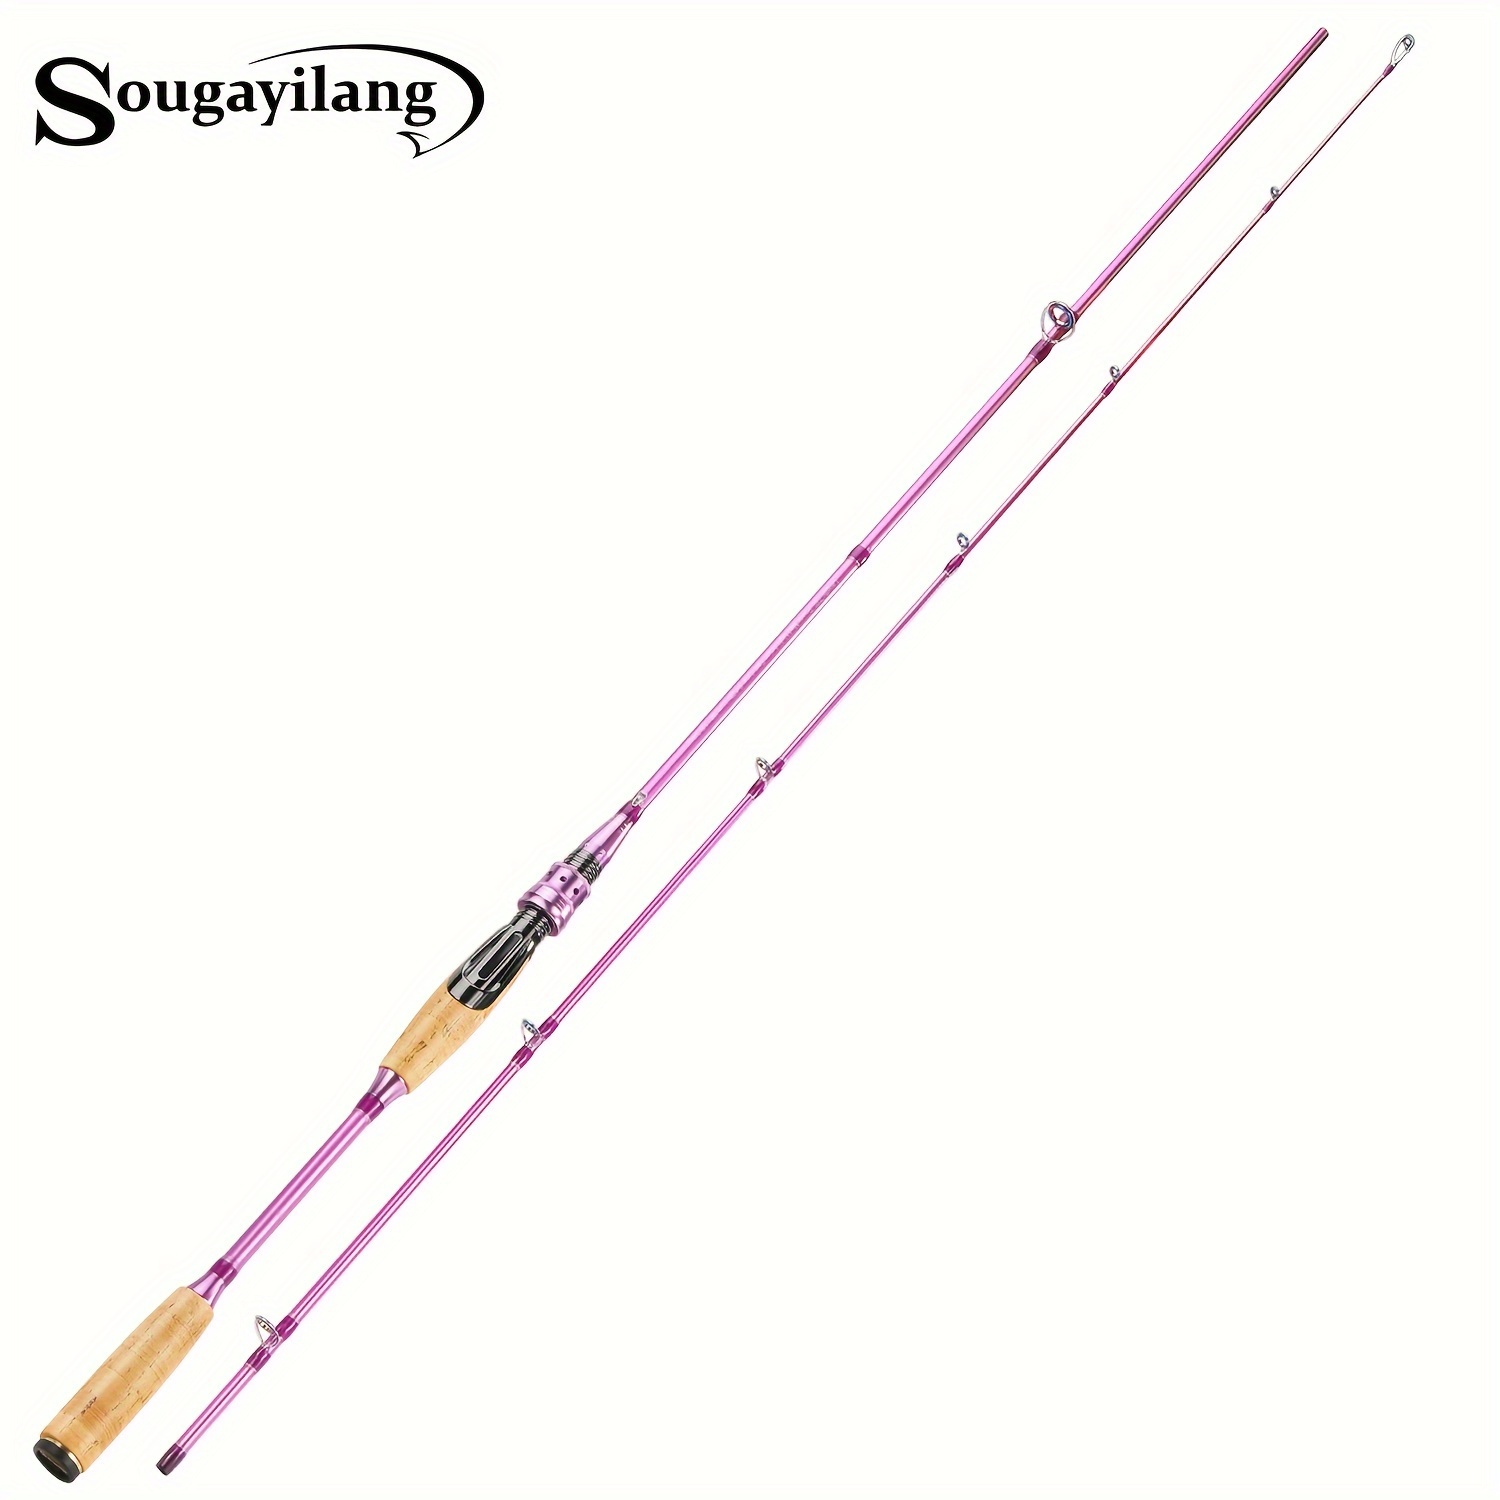 Sougayilang 1pc 2 Sections Lightweight Spinning Fishing Rod, 2.1m/6.9ft  Carbon Fiber Fishing Pole With Cork Wood Handle, Fishing Tackle For  Freshwater